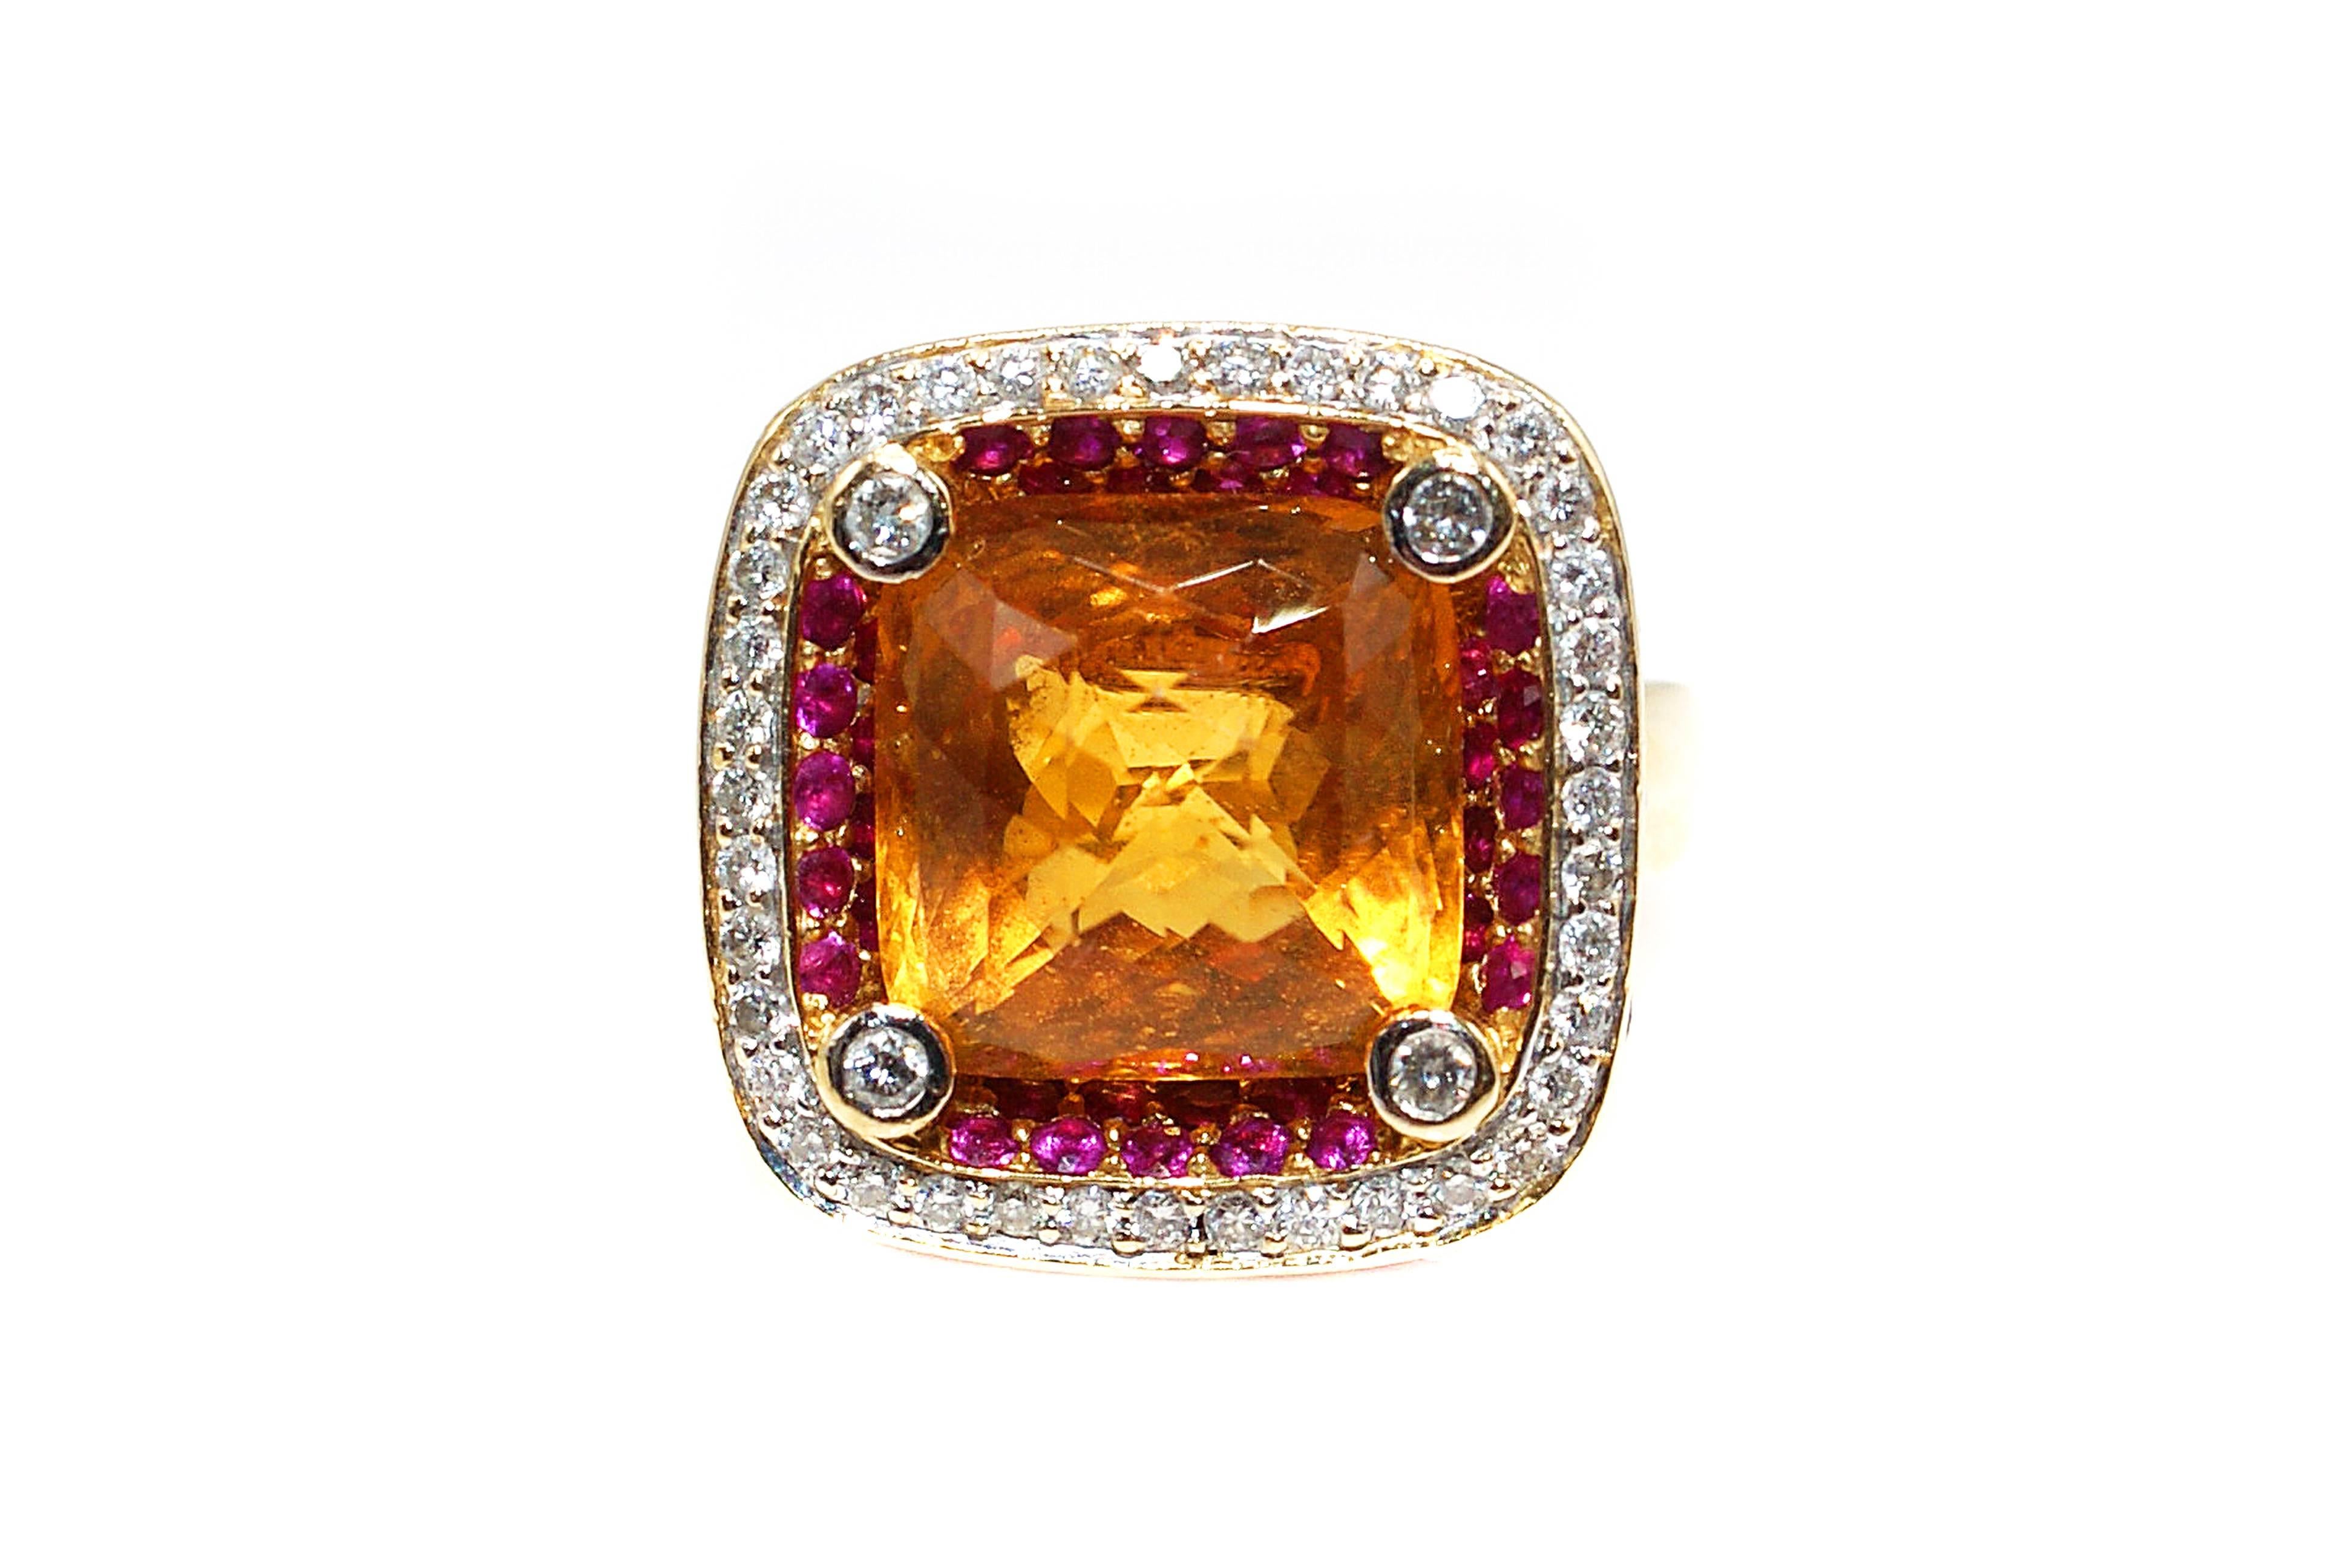 This unique ring features a 3.12 carat faceted rose cut Citrine with a small diamond on each of the four corners and two rows of pink sapphires immediately surrounding the stone. A row of channel set bright white and sparkly diamonds all surrounded